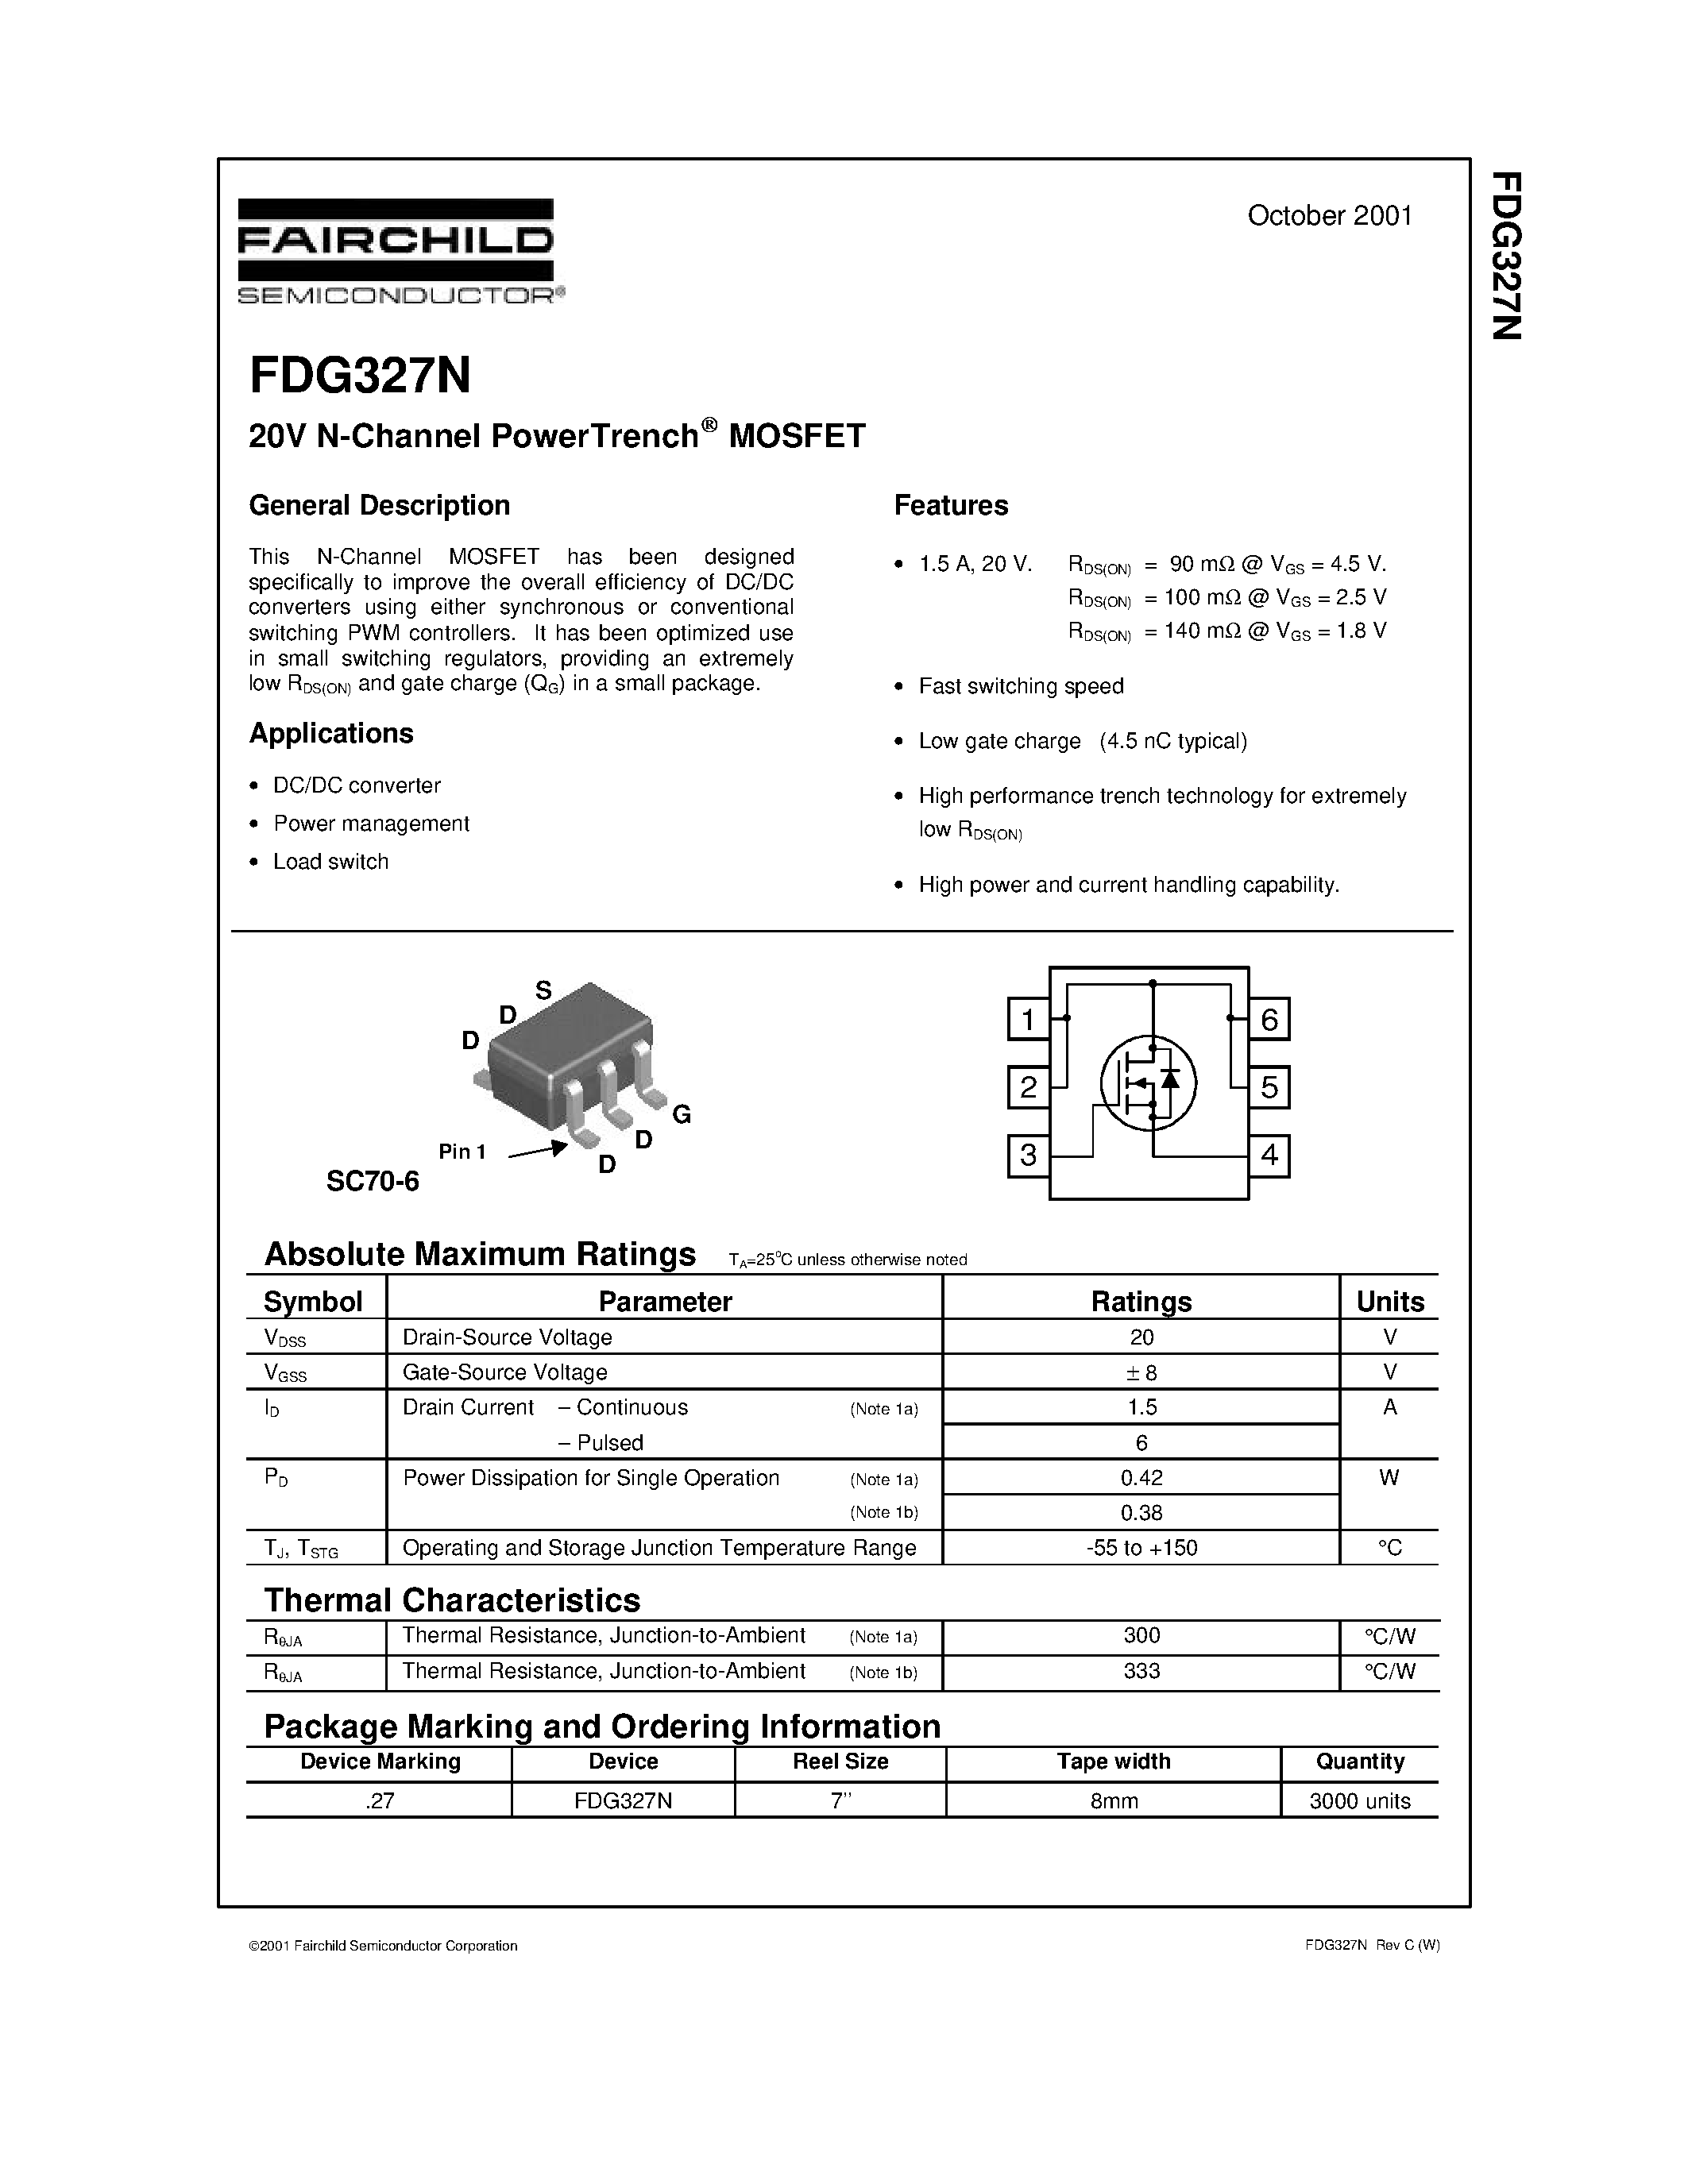 Даташит FDG327N-20V N-Channel PowerTrench MOSFET страница 1